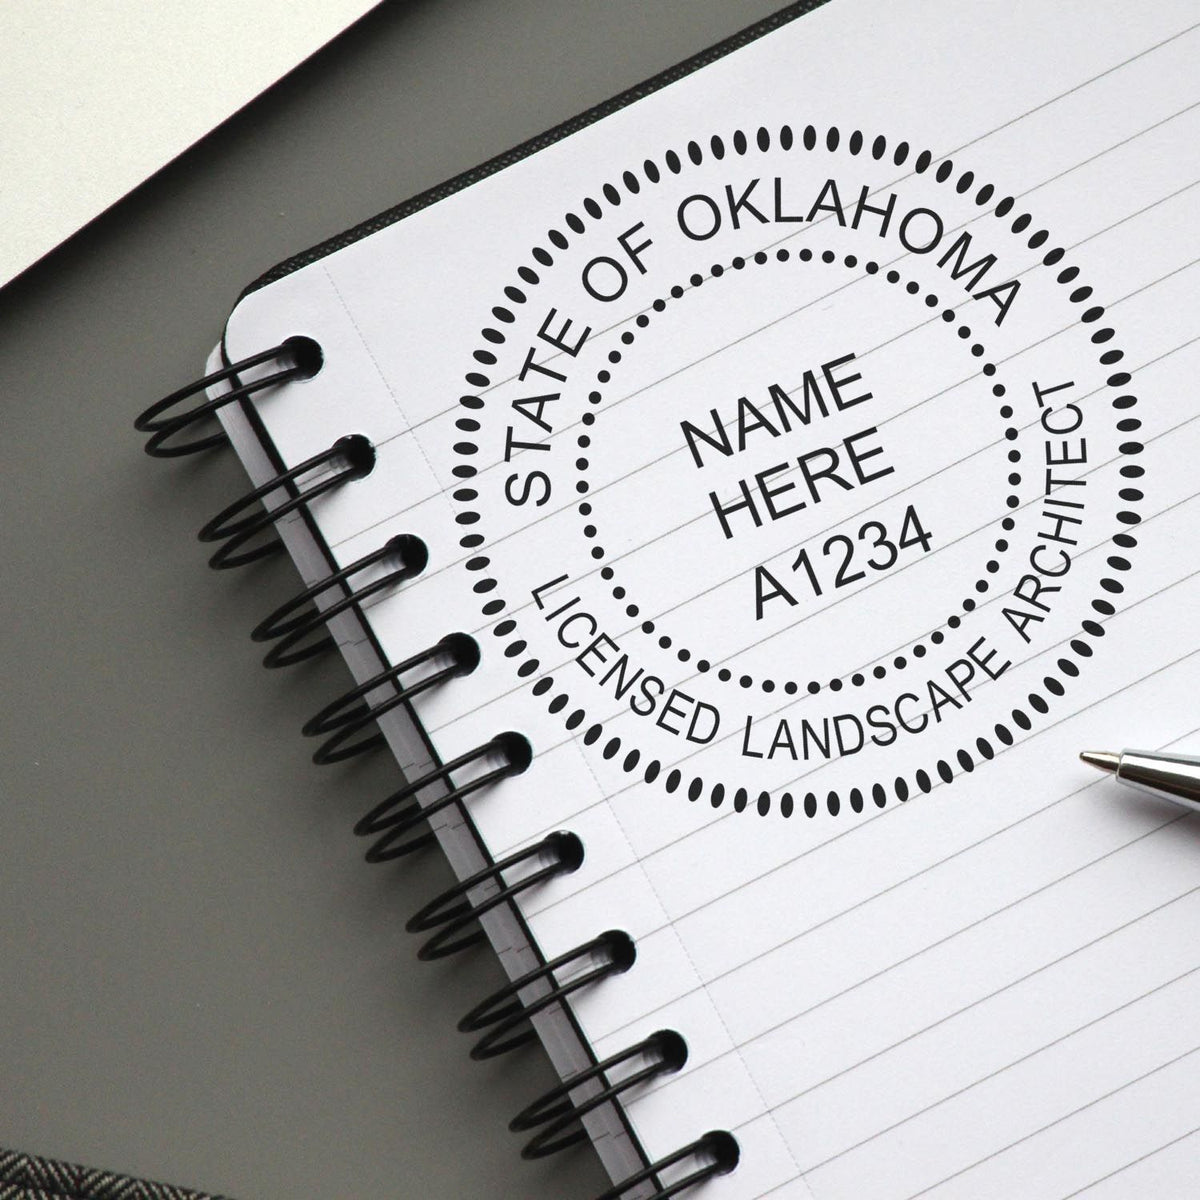 This paper is stamped with a sample imprint of the Slim Pre-Inked Oklahoma Landscape Architect Seal Stamp, signifying its quality and reliability.